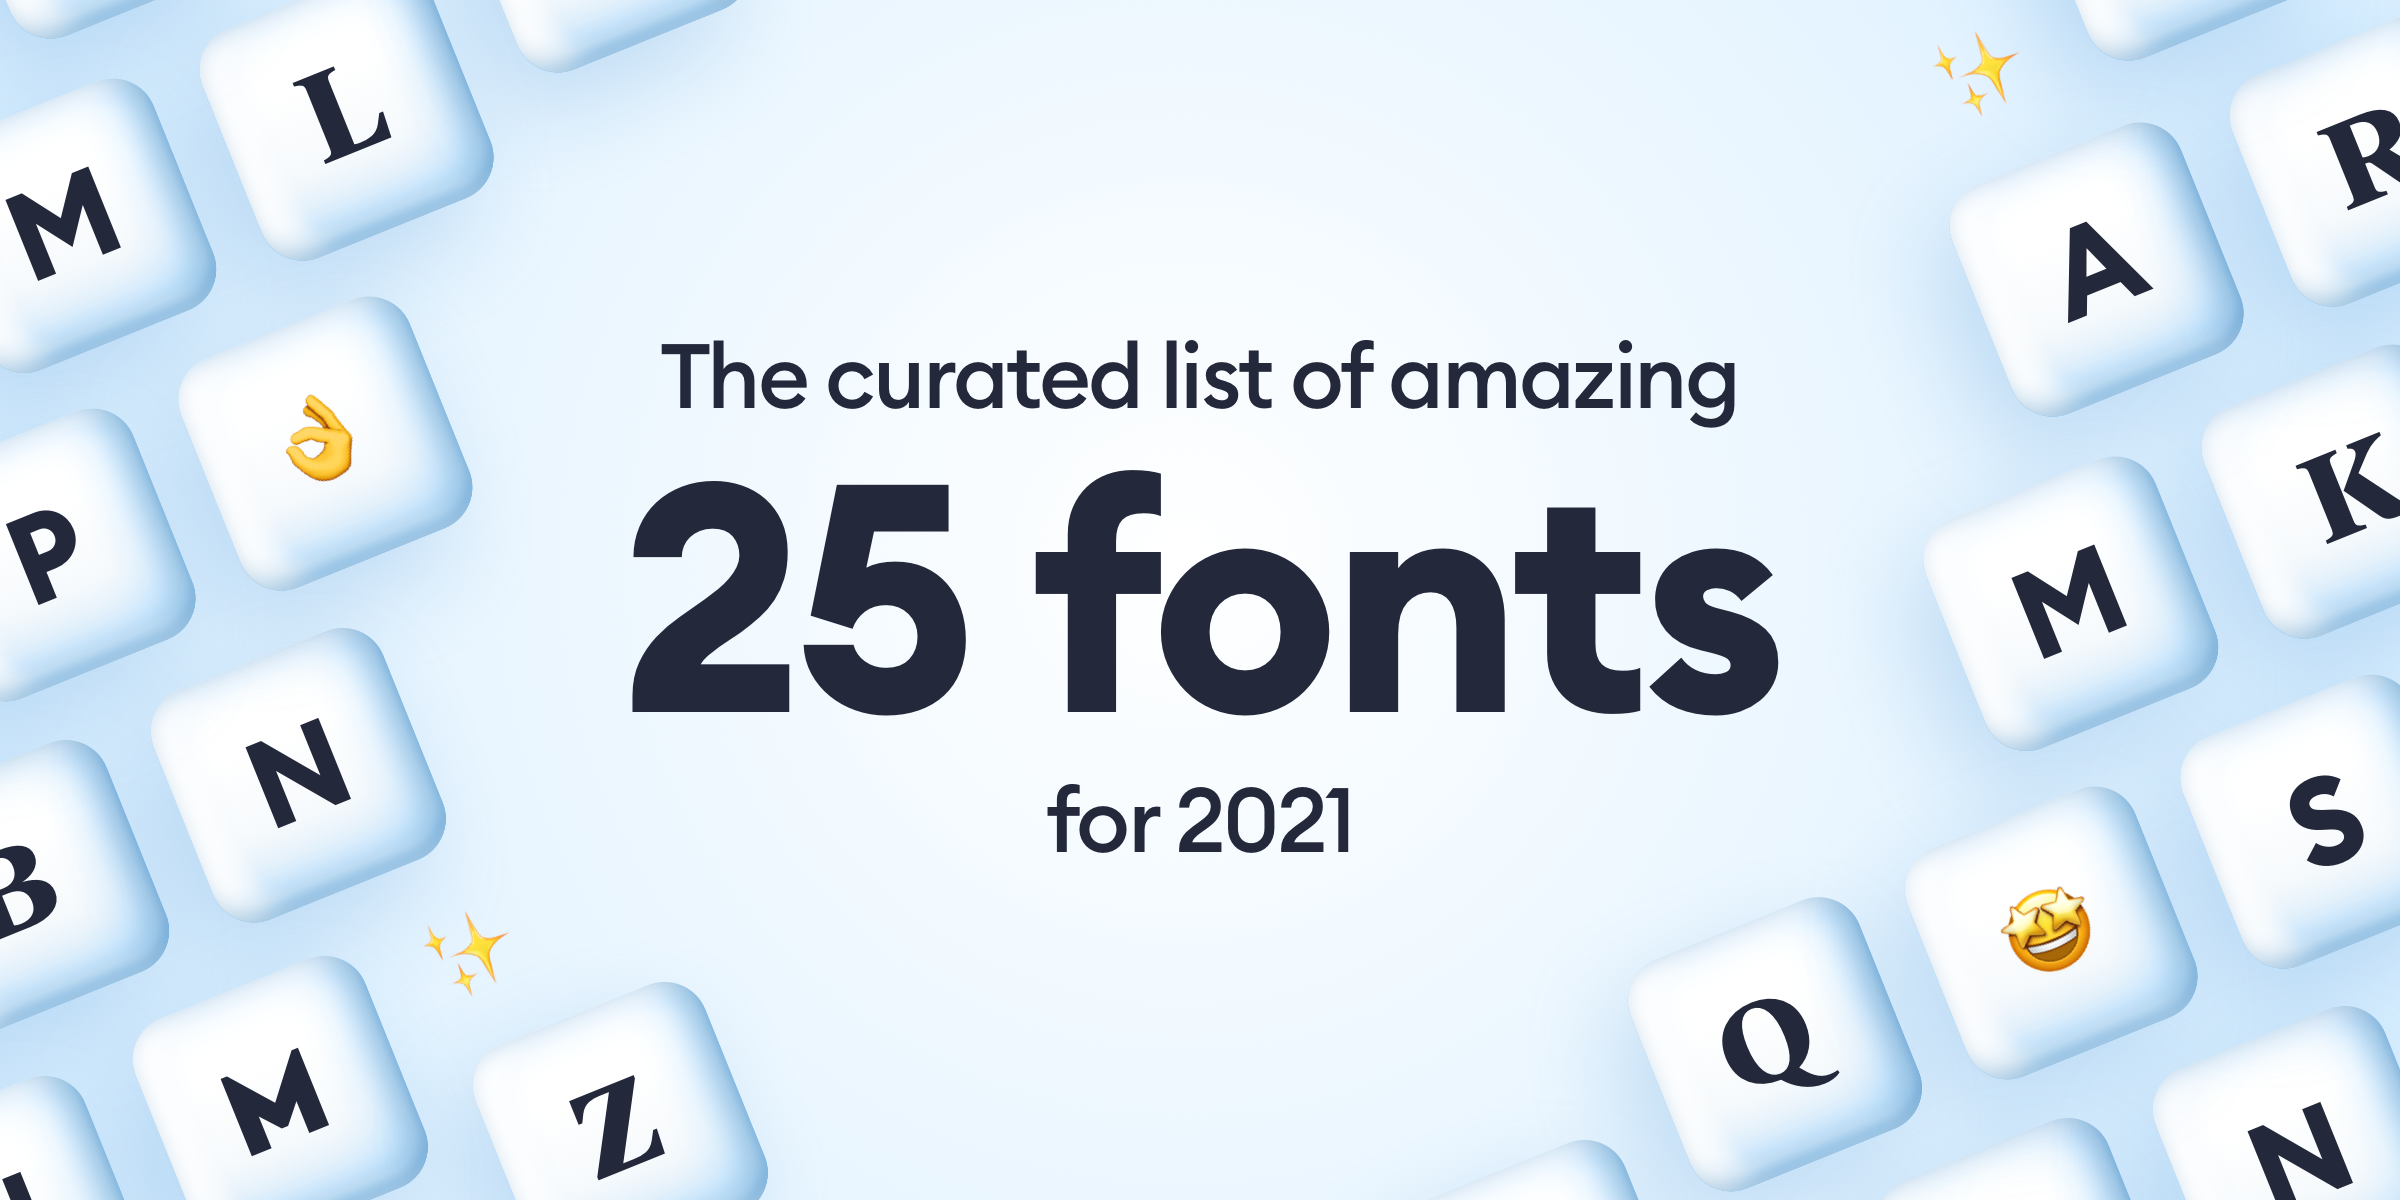 The cover for " the curated list of amazing 25 fonts for 2021" with different letters and emojis